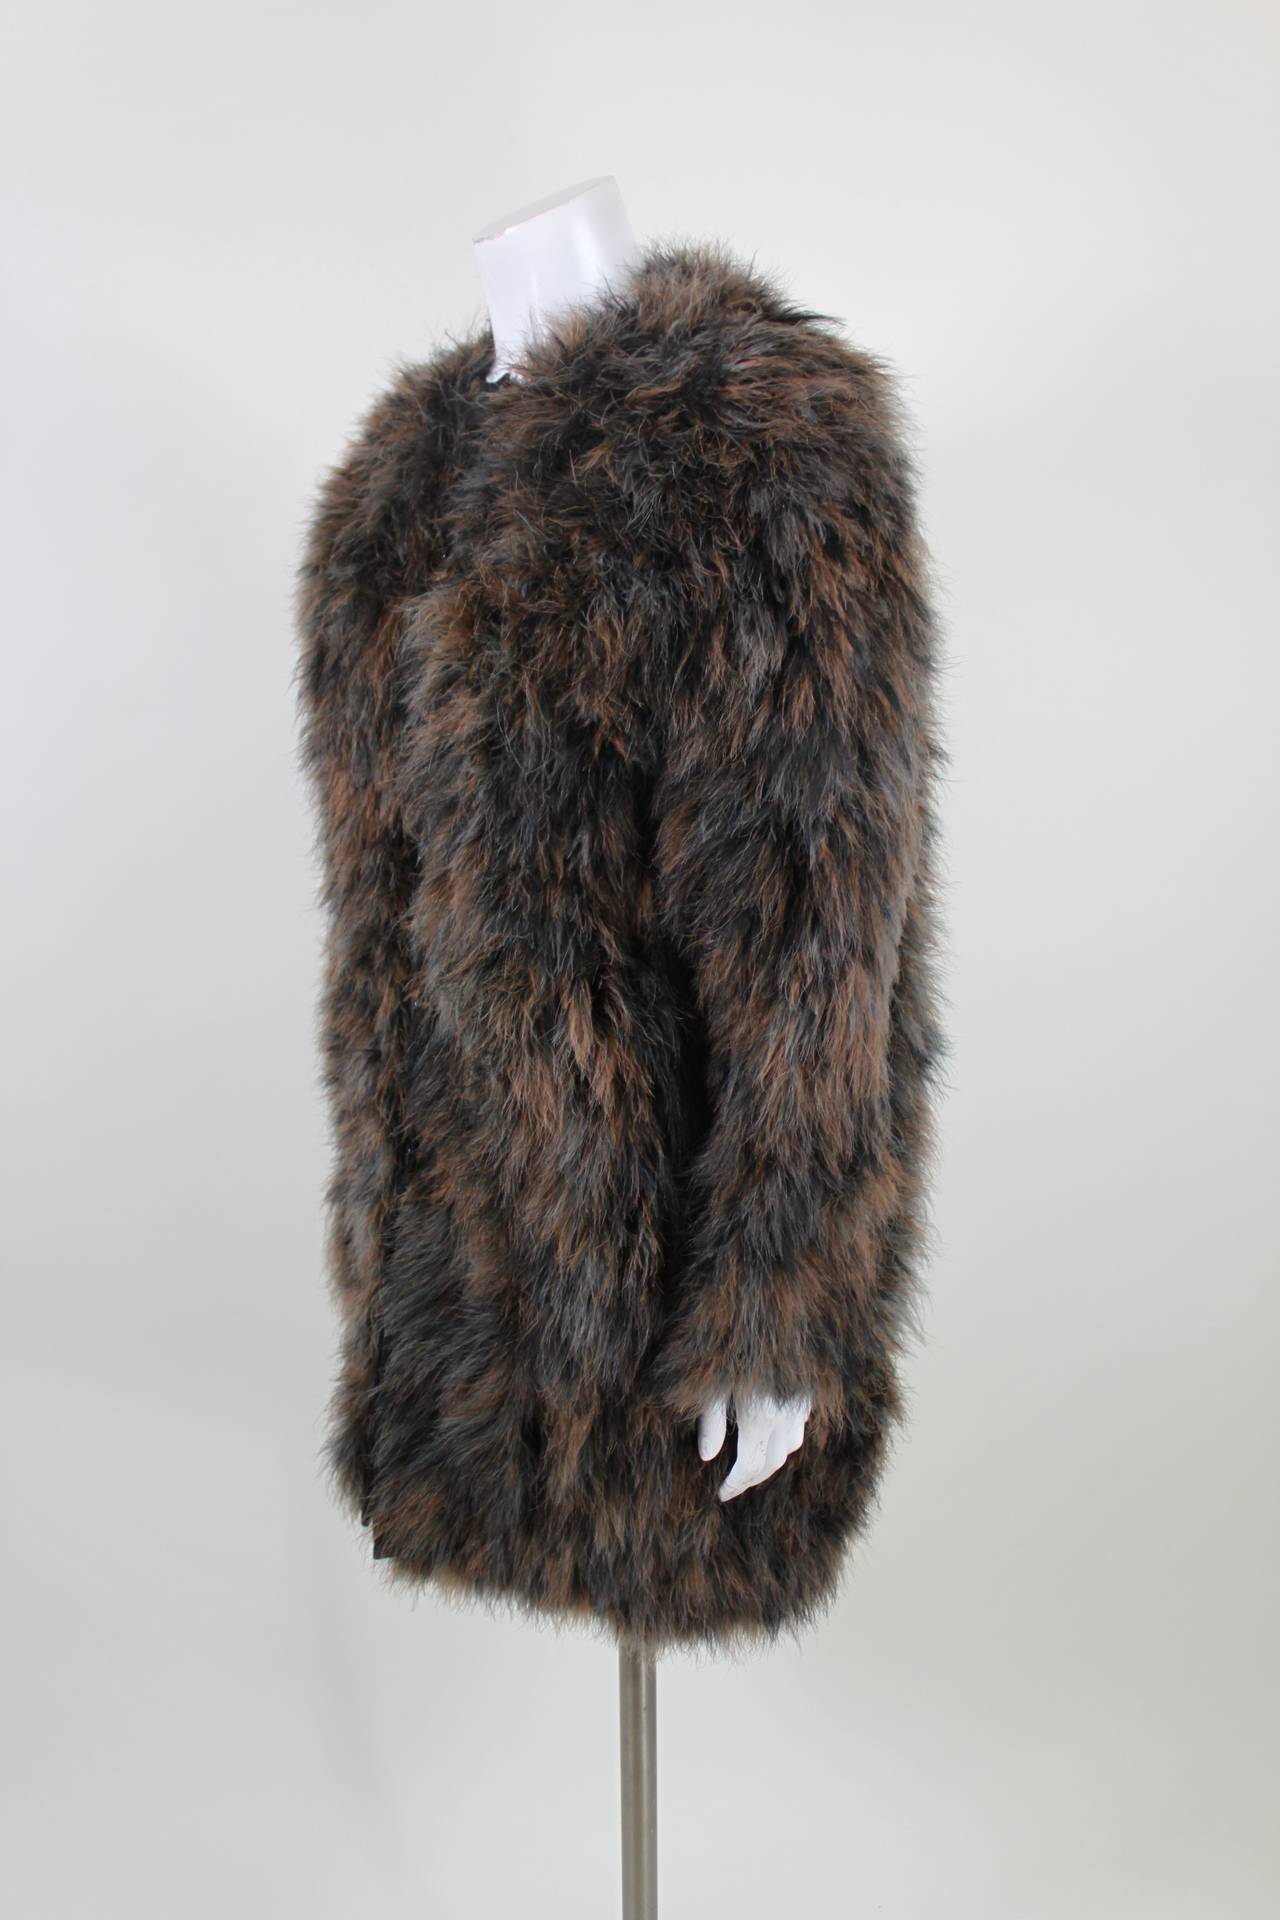 Black Chantal Thomass 1980s Ice Grey and Brown Marabou Coat For Sale